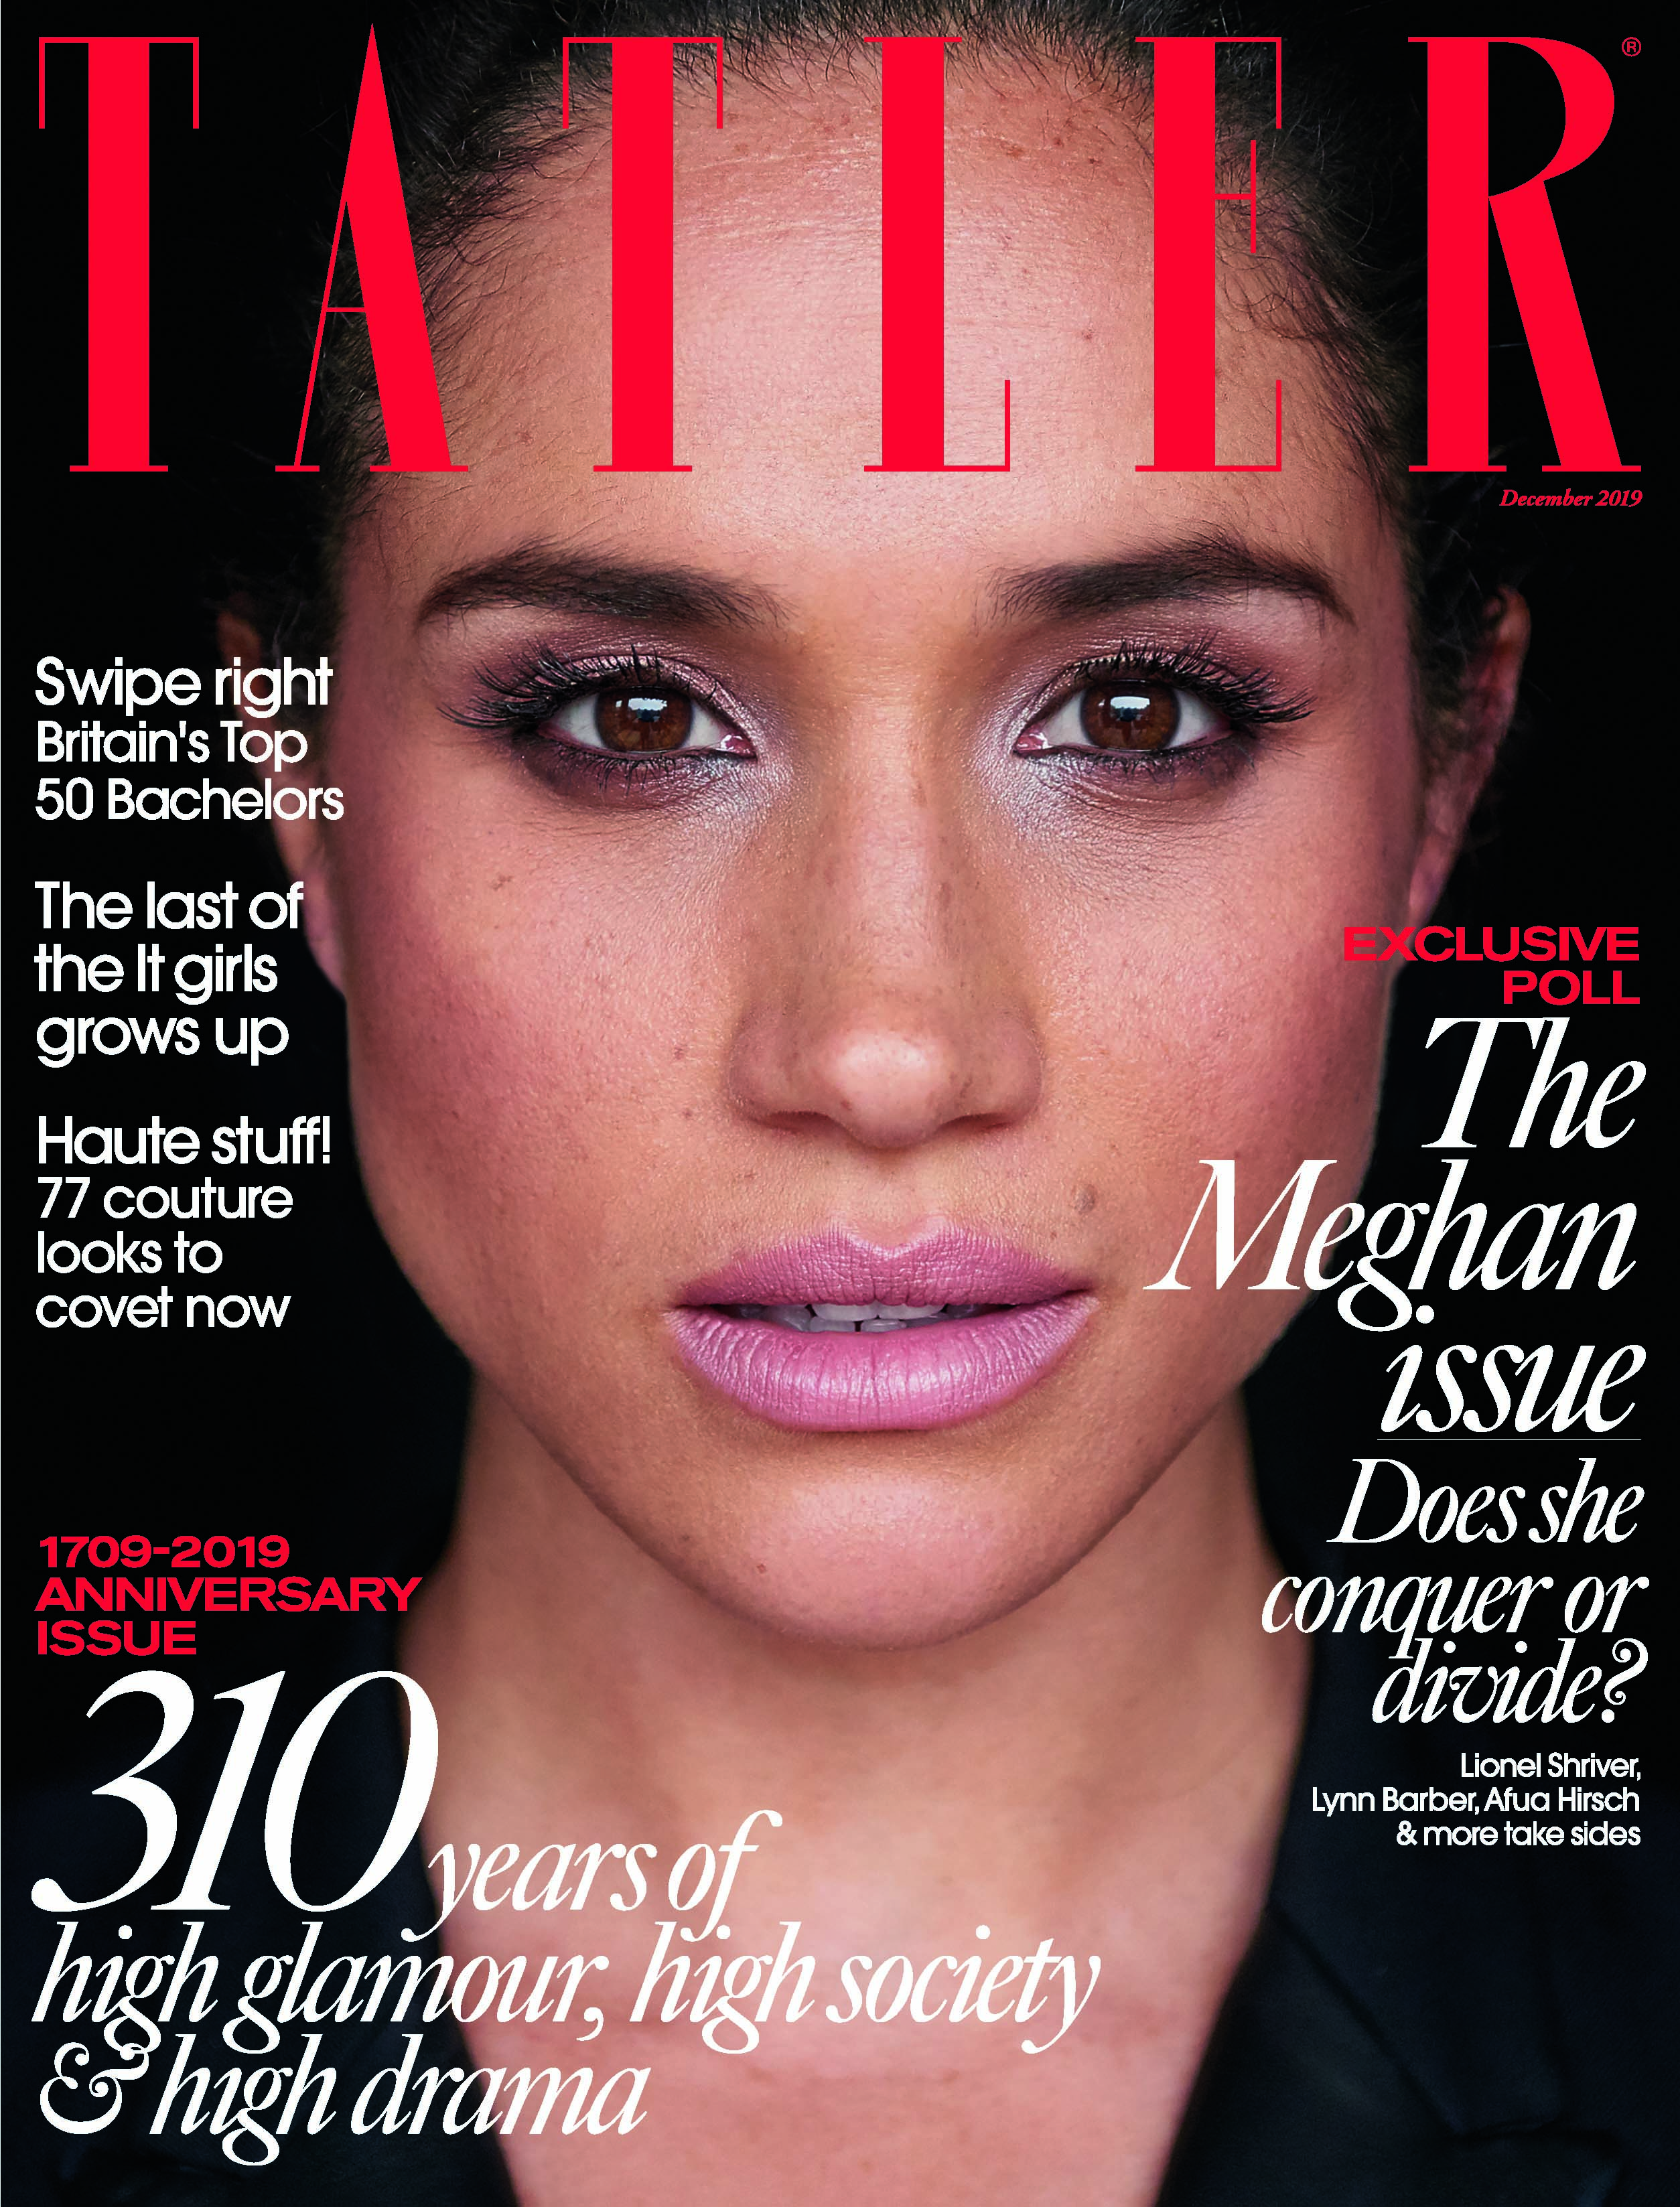 The Duchess of Sussex on the cover of Tatler